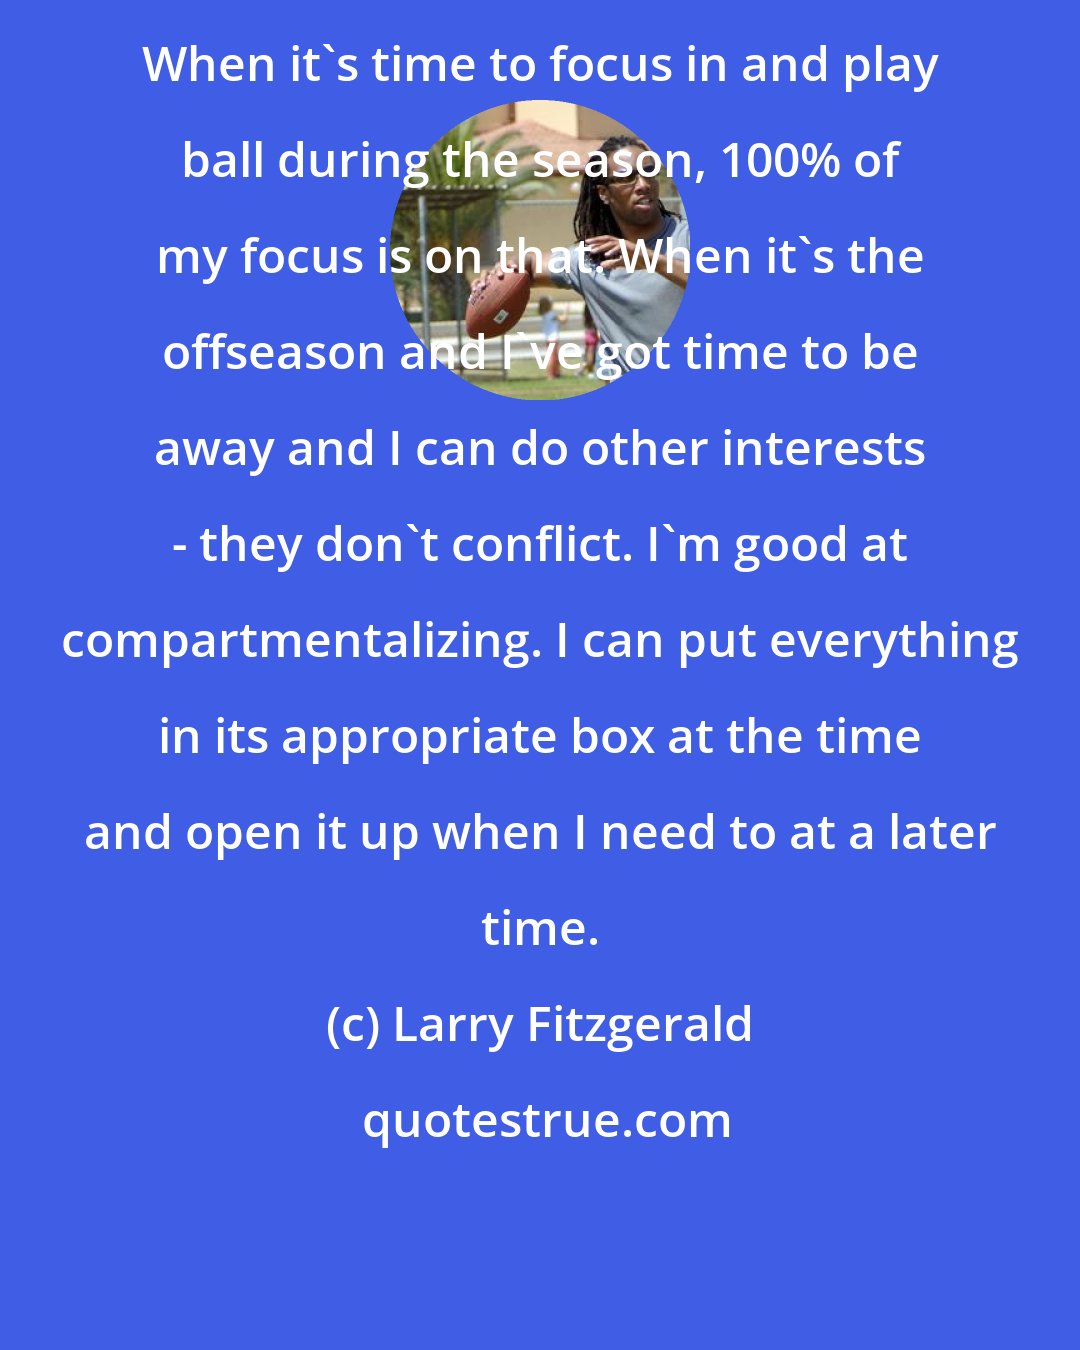 Larry Fitzgerald: When it's time to focus in and play ball during the season, 100% of my focus is on that. When it's the offseason and I've got time to be away and I can do other interests - they don't conflict. I'm good at compartmentalizing. I can put everything in its appropriate box at the time and open it up when I need to at a later time.